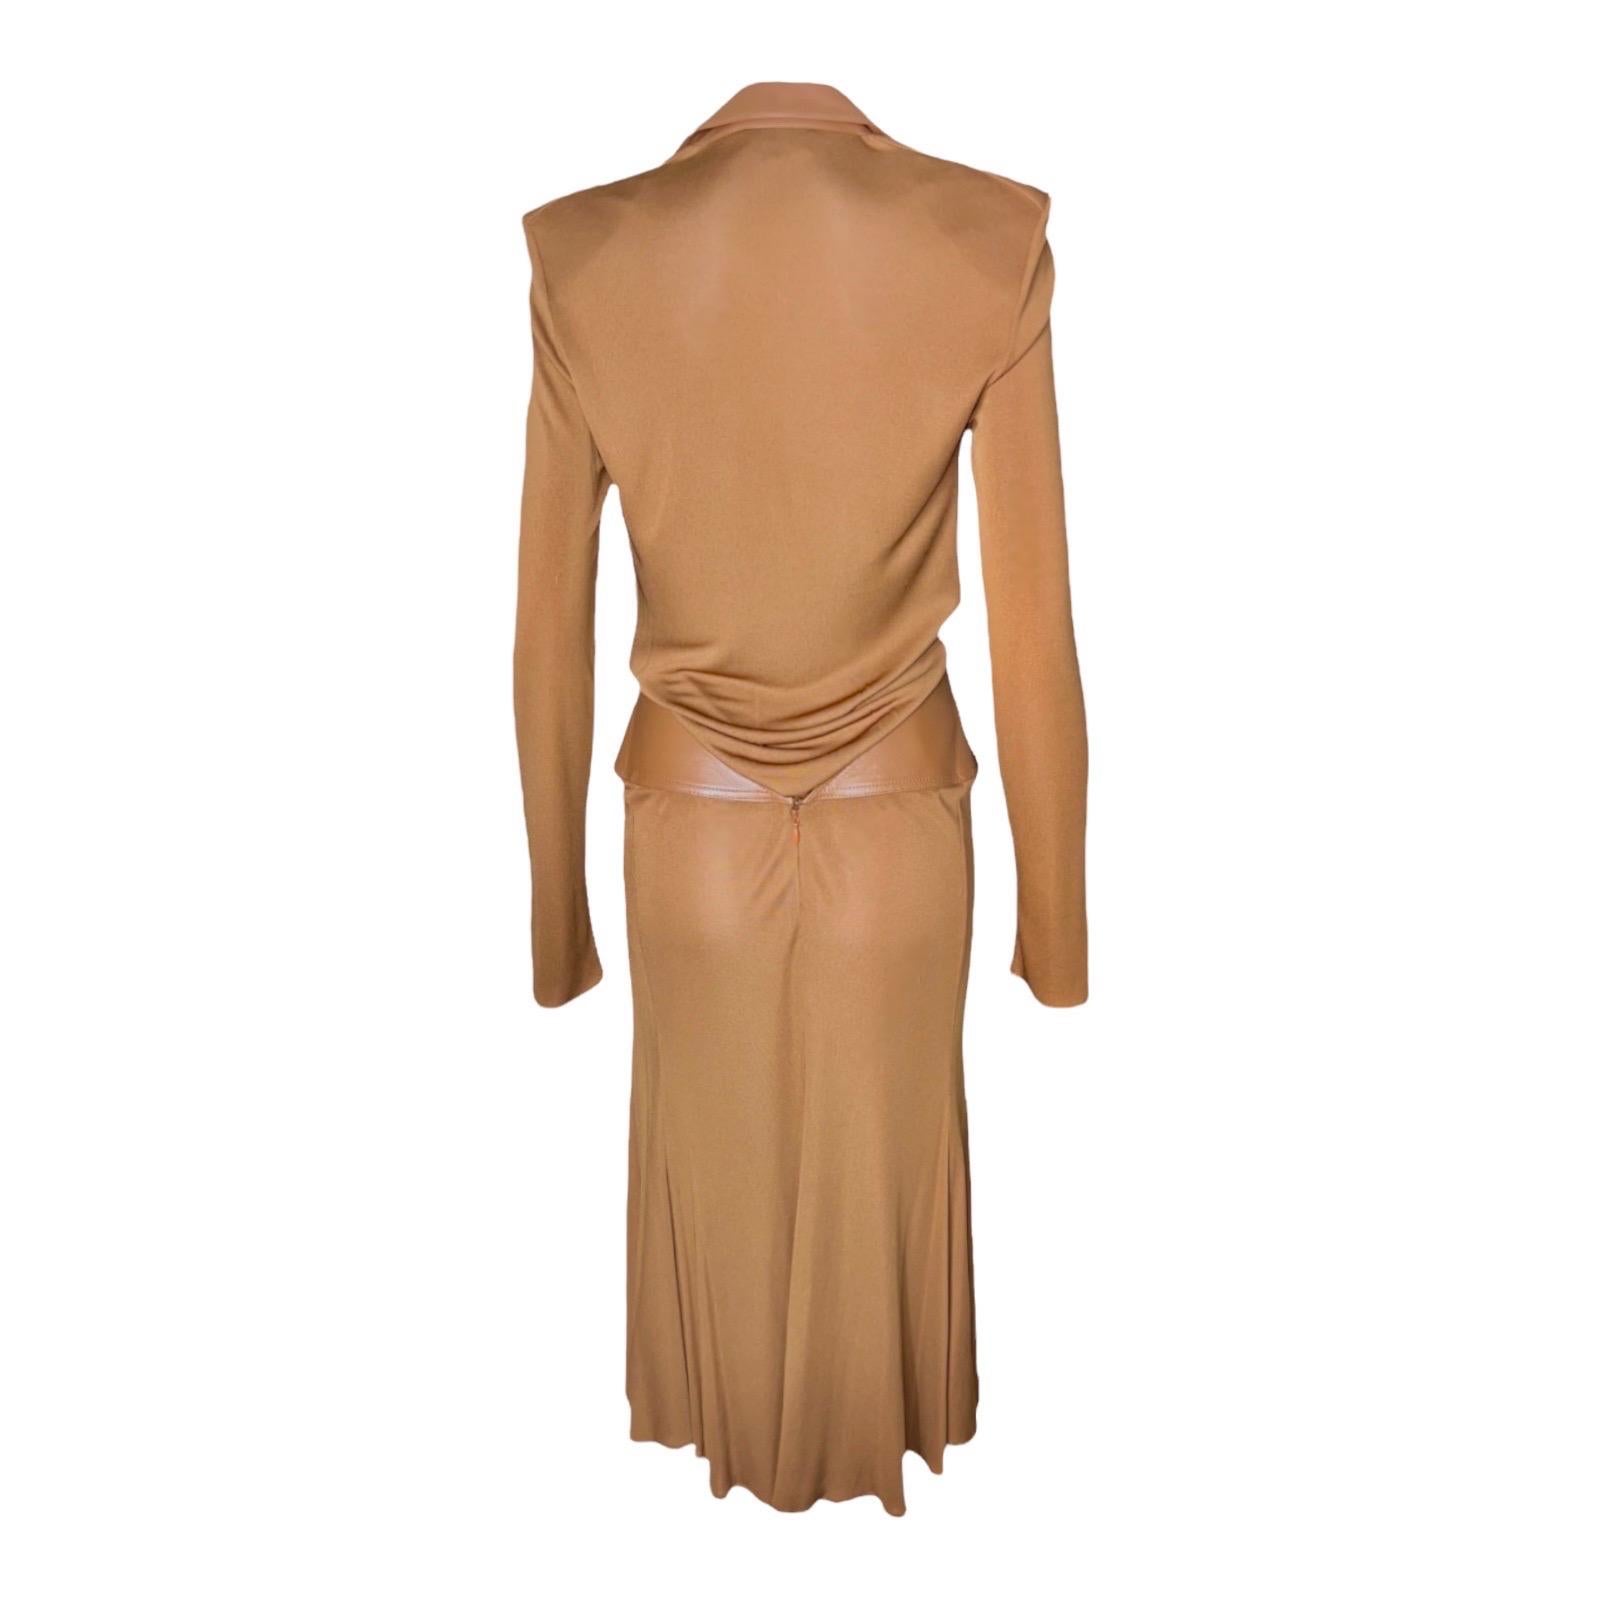 HOT HOT HOT

GIANNI VERSACE COUTURE

AS SHOWN ON THE RUNWAY SHOW AND AD CAMPAIGN

SOLD OUT IMMEDIATELY
Impossible to find!
A true gem! This is a very rare and out-of-the-ordinary gown
From the VERSACE Fall 2001 collection
In a rare cognac color for